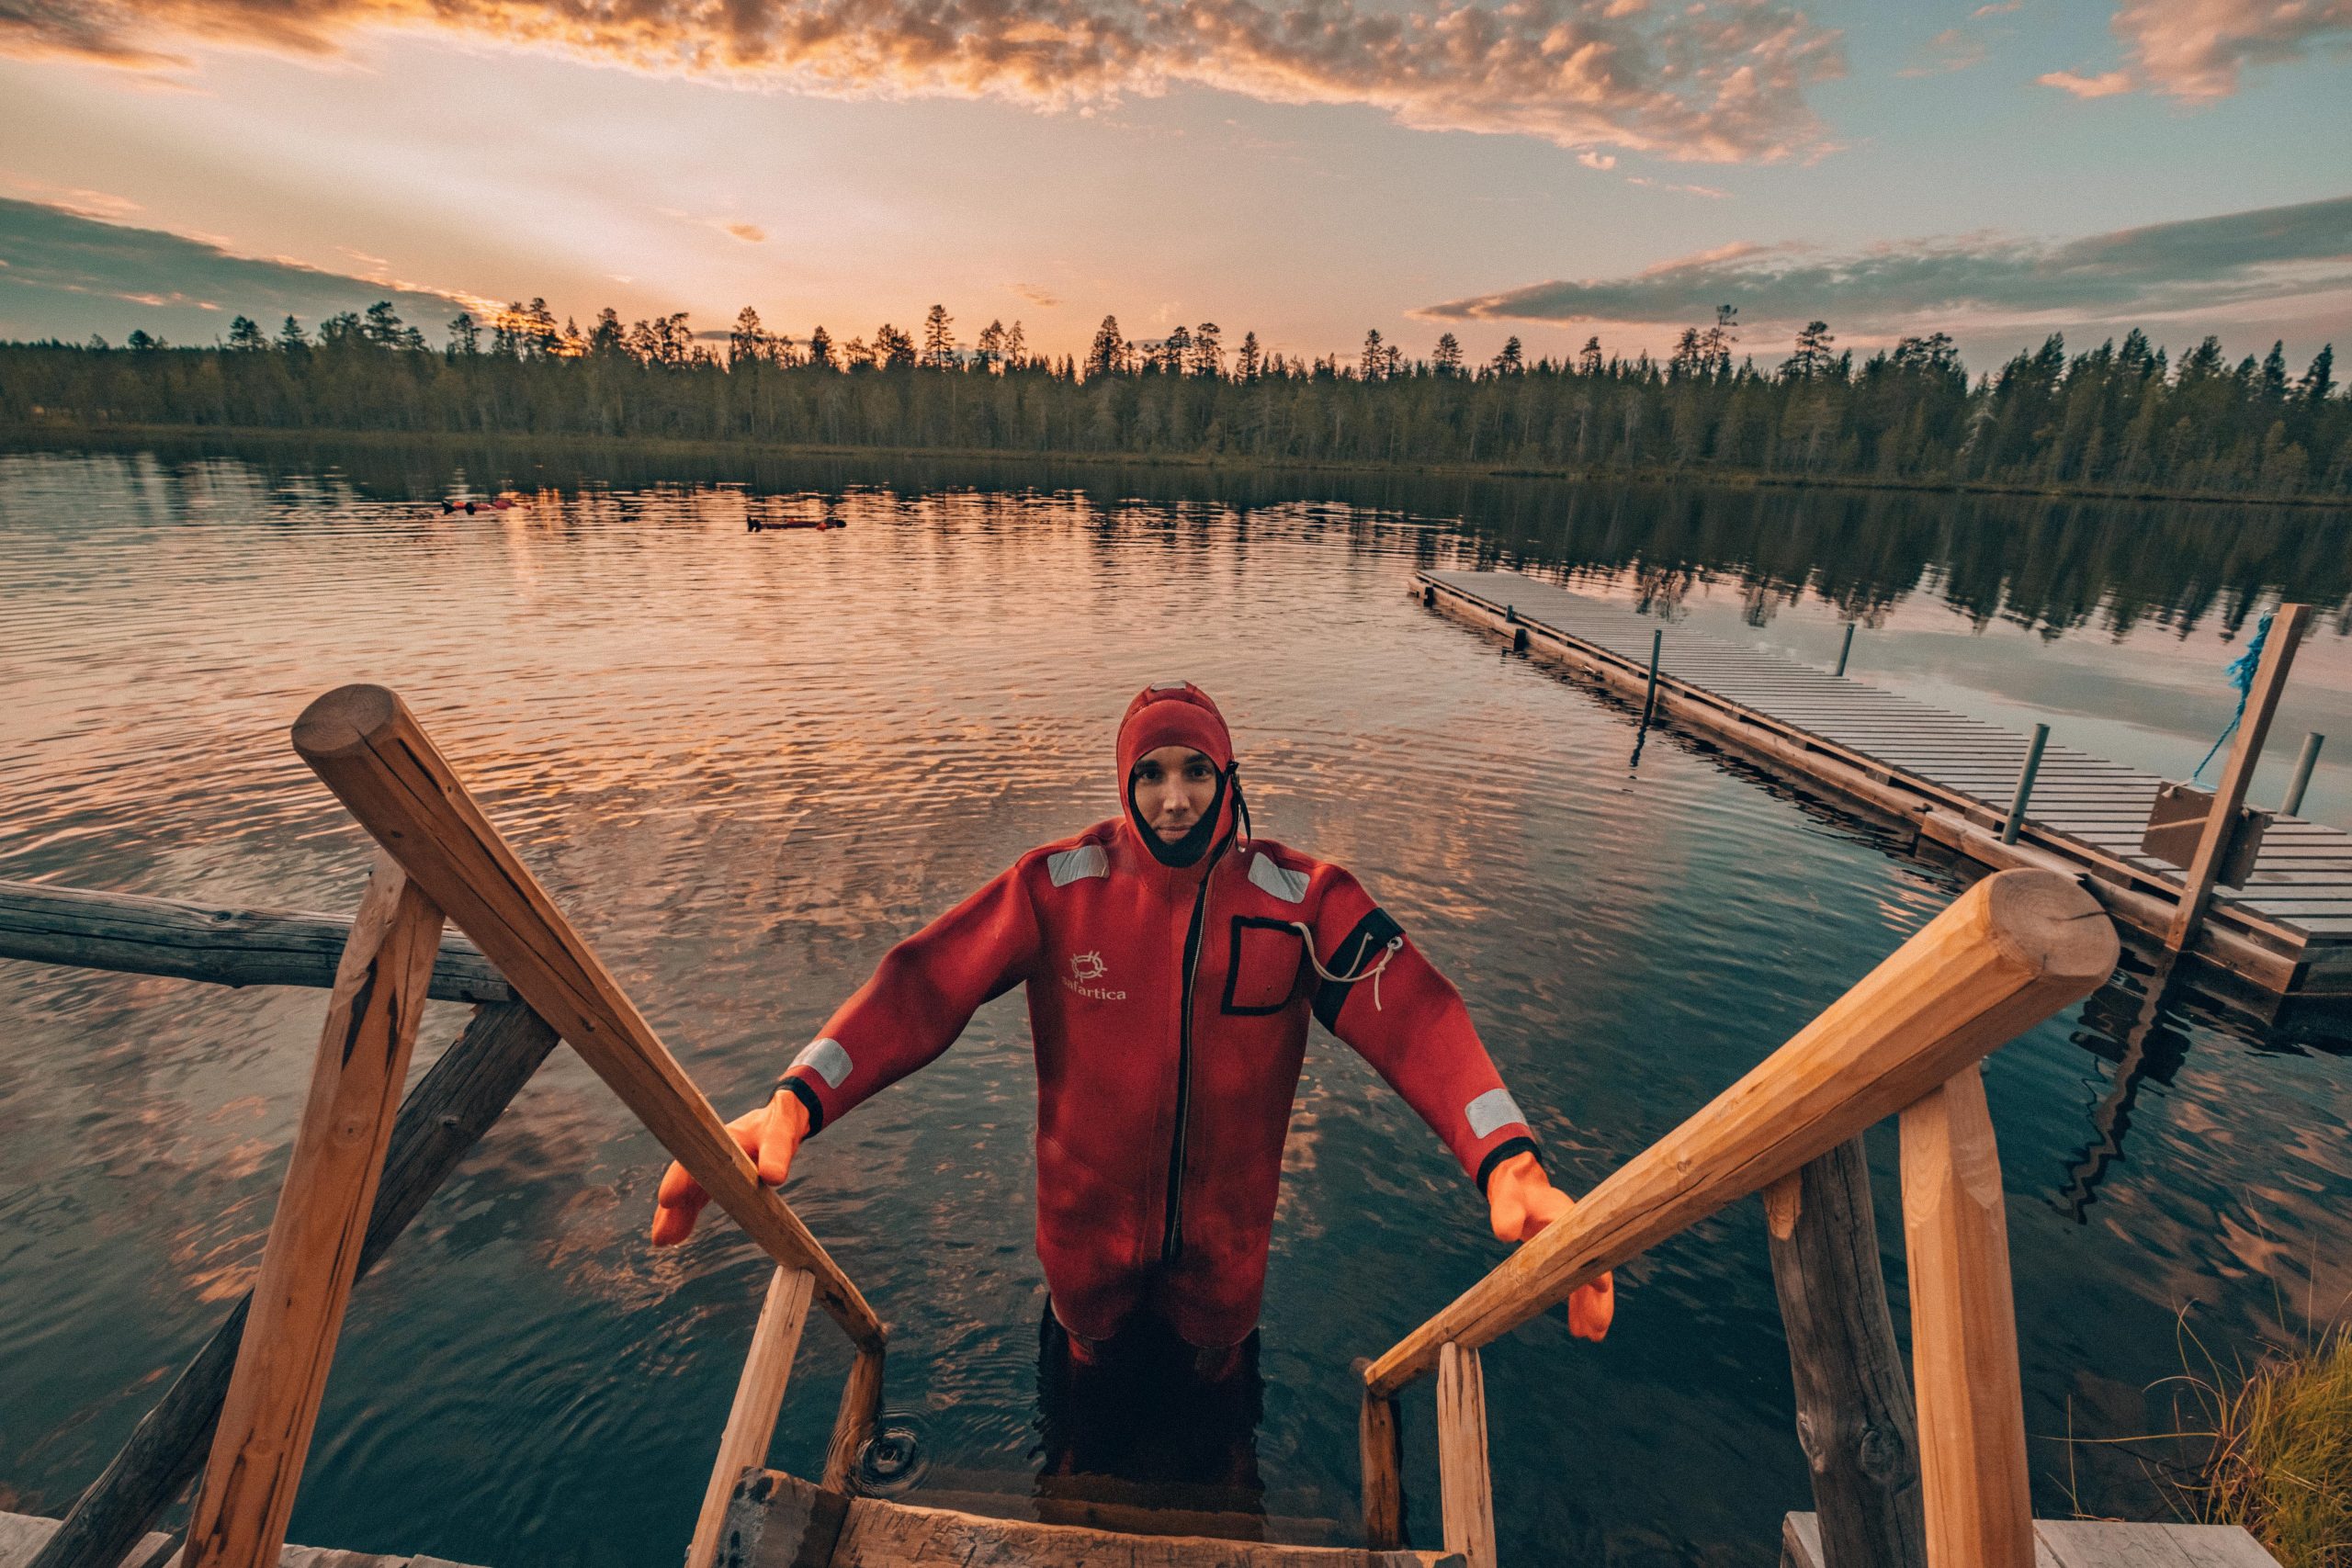 G in his fun floating suit in Finnish Lapland